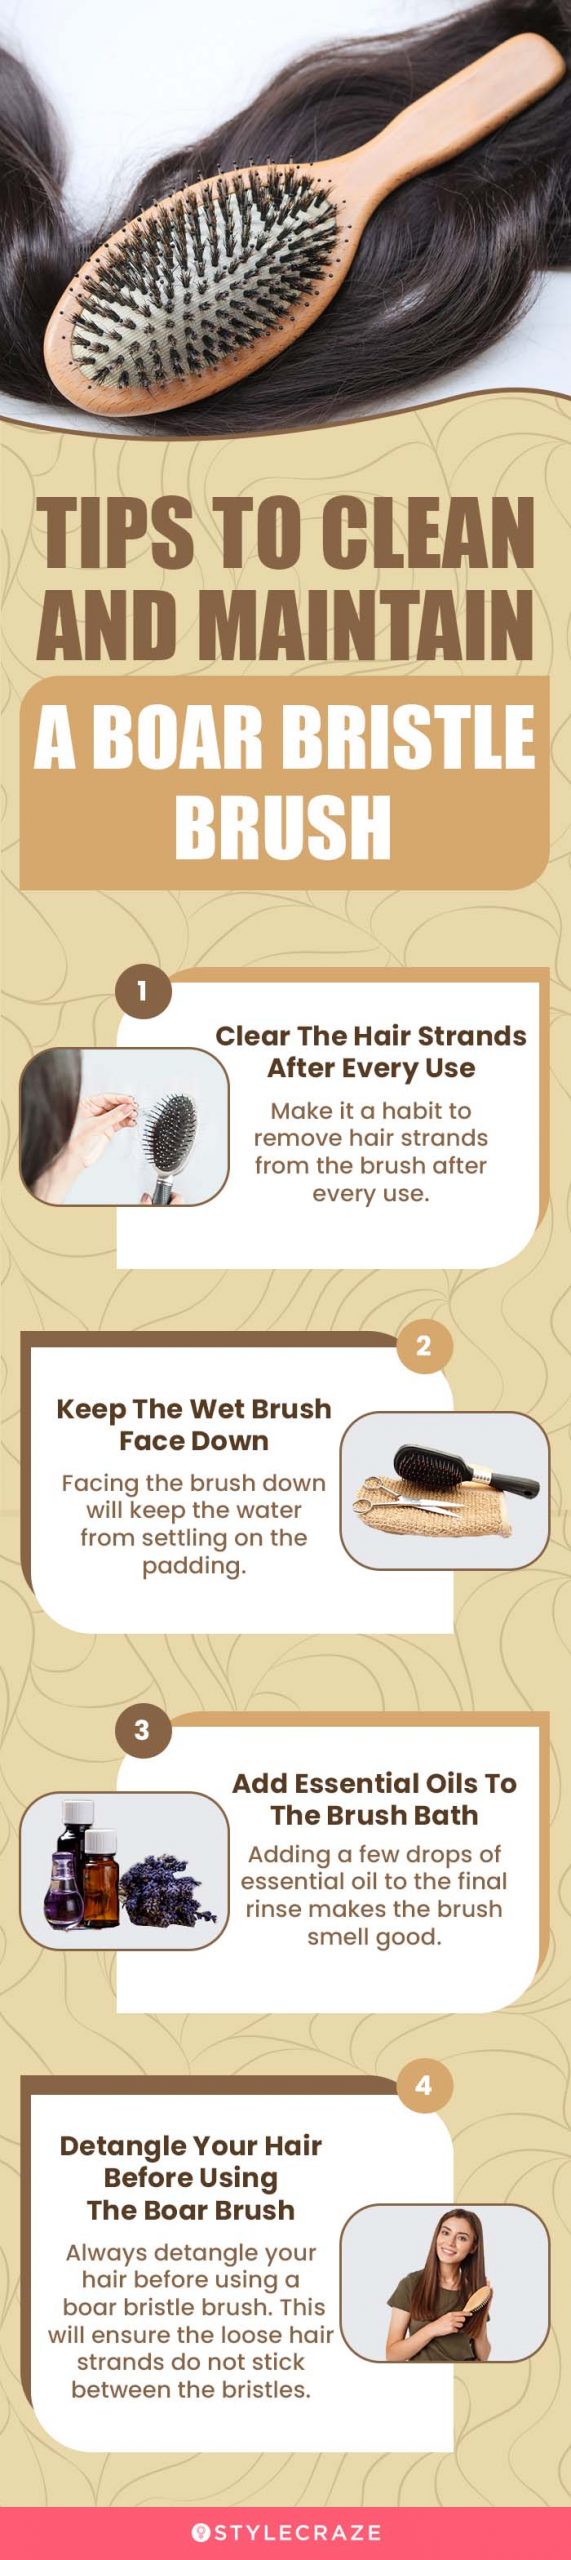 tips to clean and maintain a boar bristle brush (infographic)